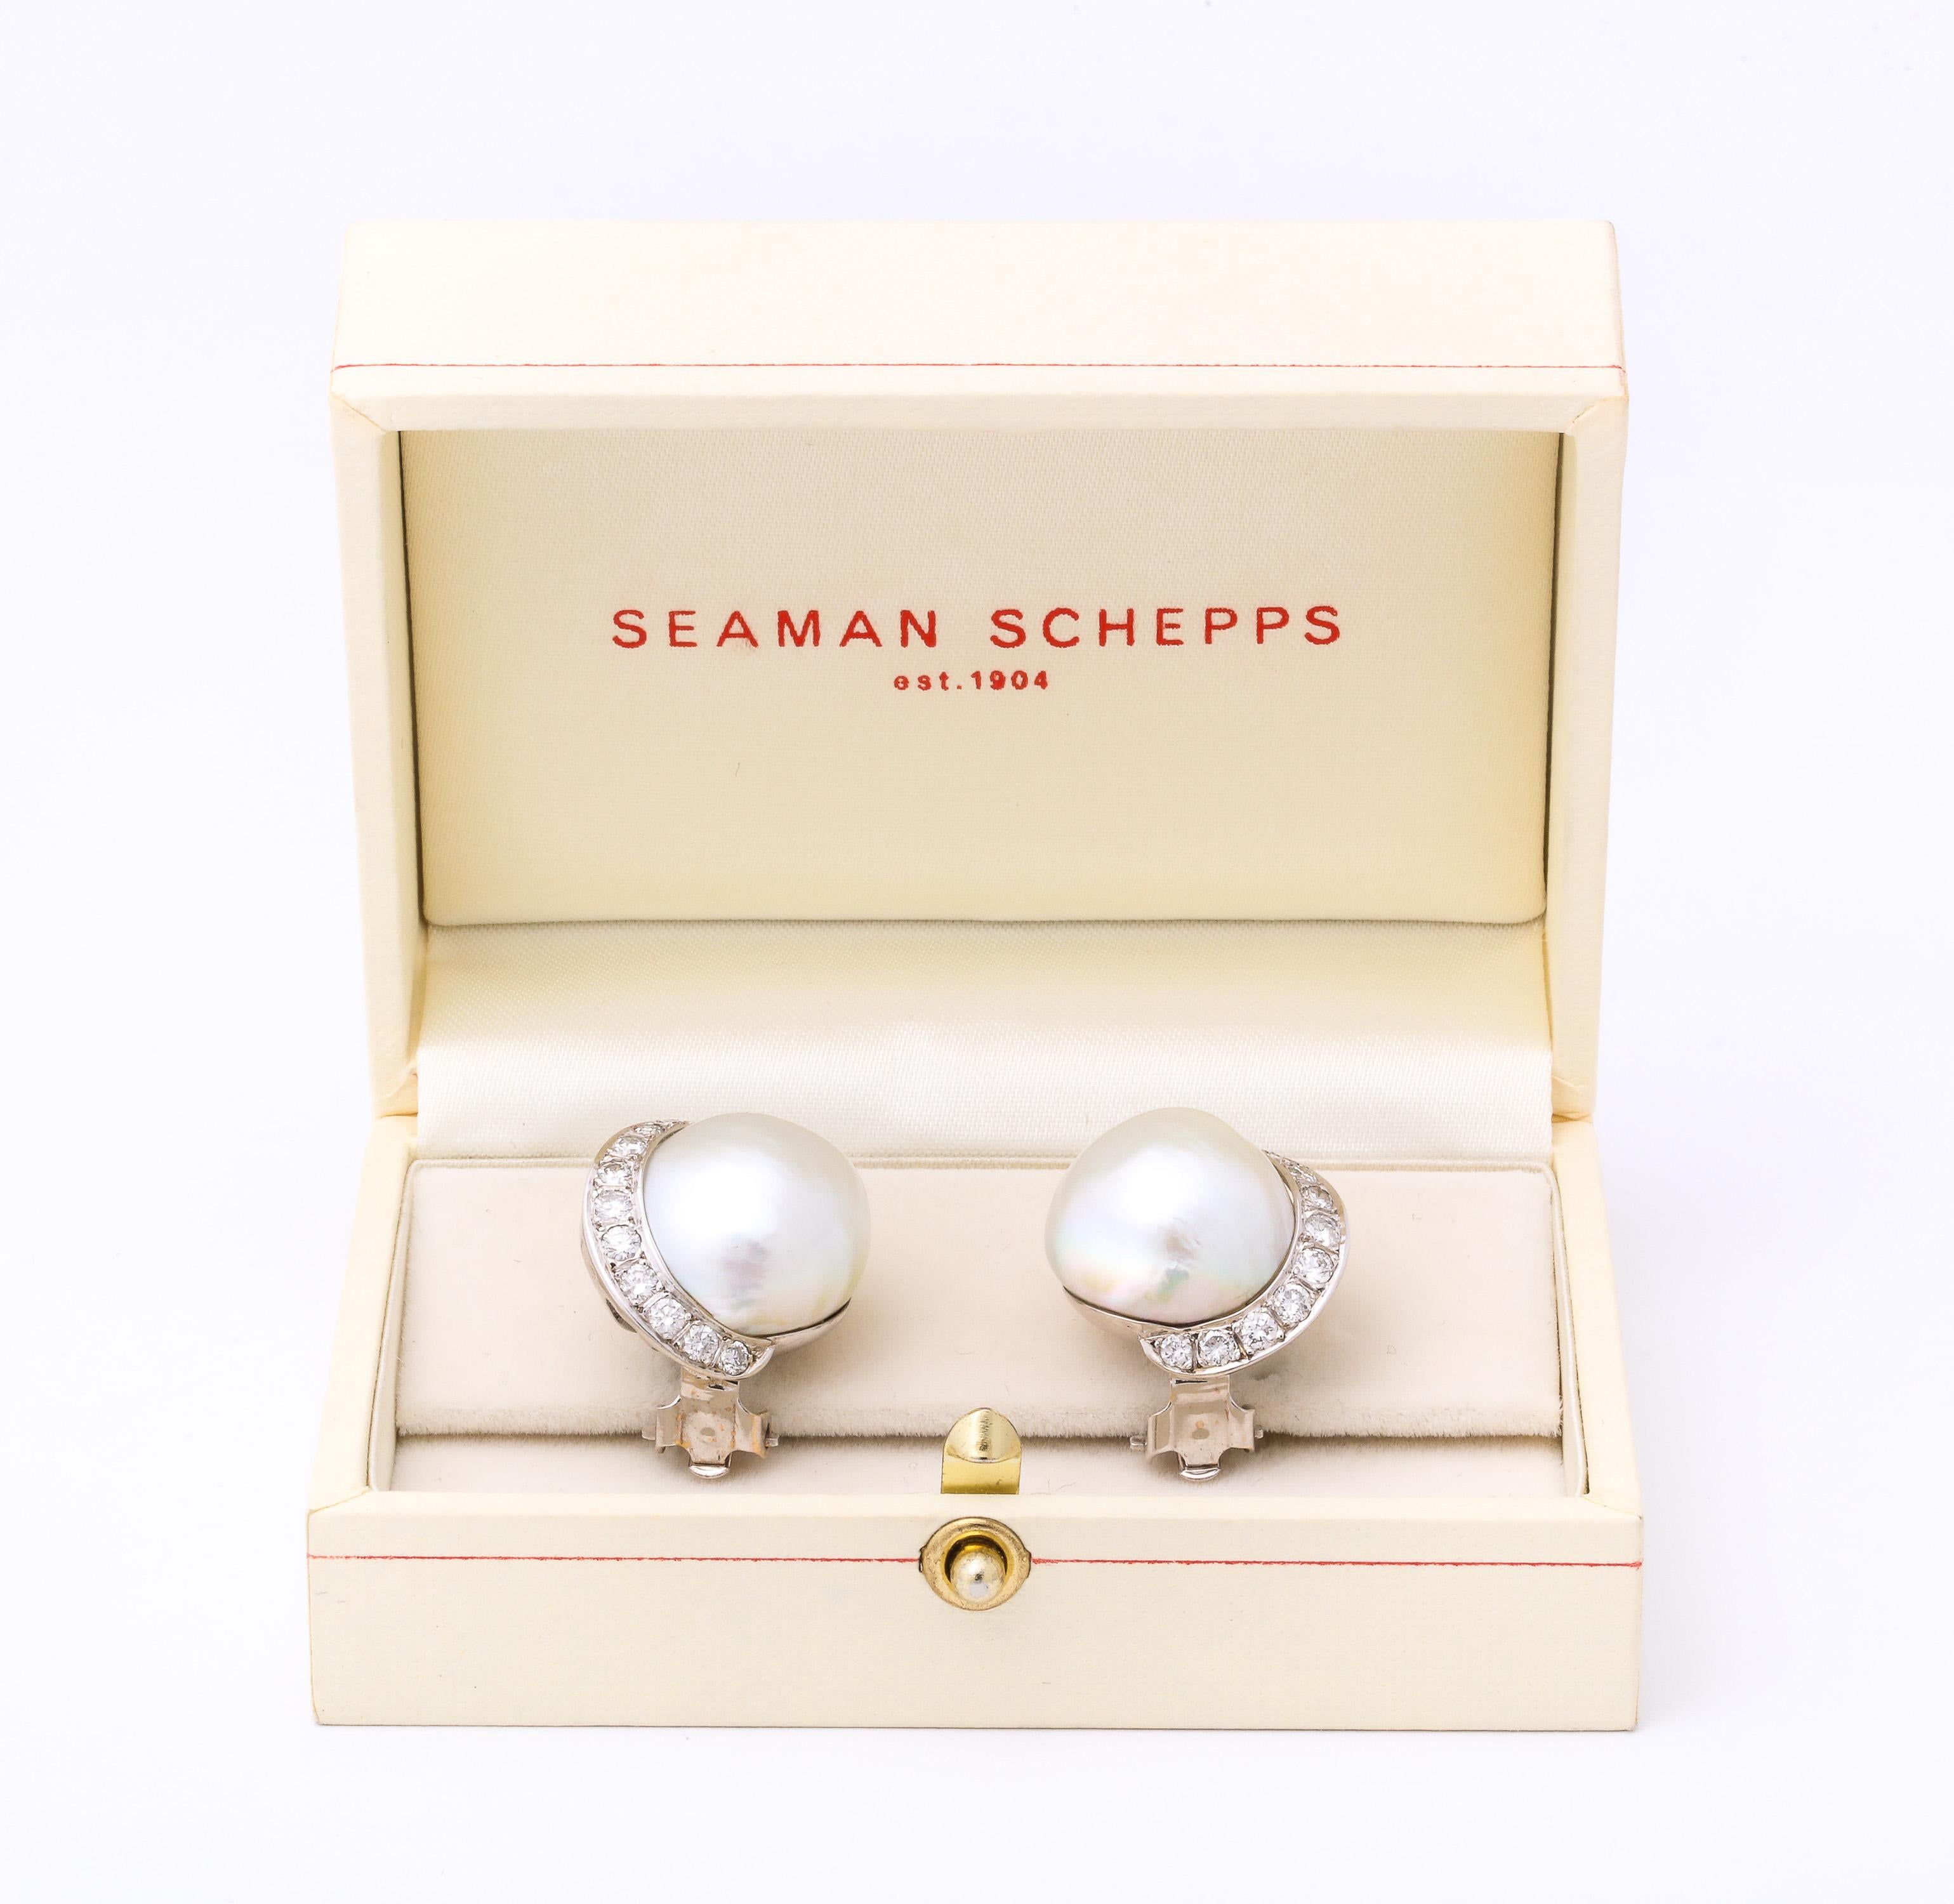 One Pair Of 14kt White Gold Earclips Composed Of A 20 Mm Mabe Pearl And Flanked By Numerous Full Cut Diamonds Weighing Approximately 1 .50 Carat Total Weight.Signed Seaman Schepps Created In The 1950's In The United states Of America.